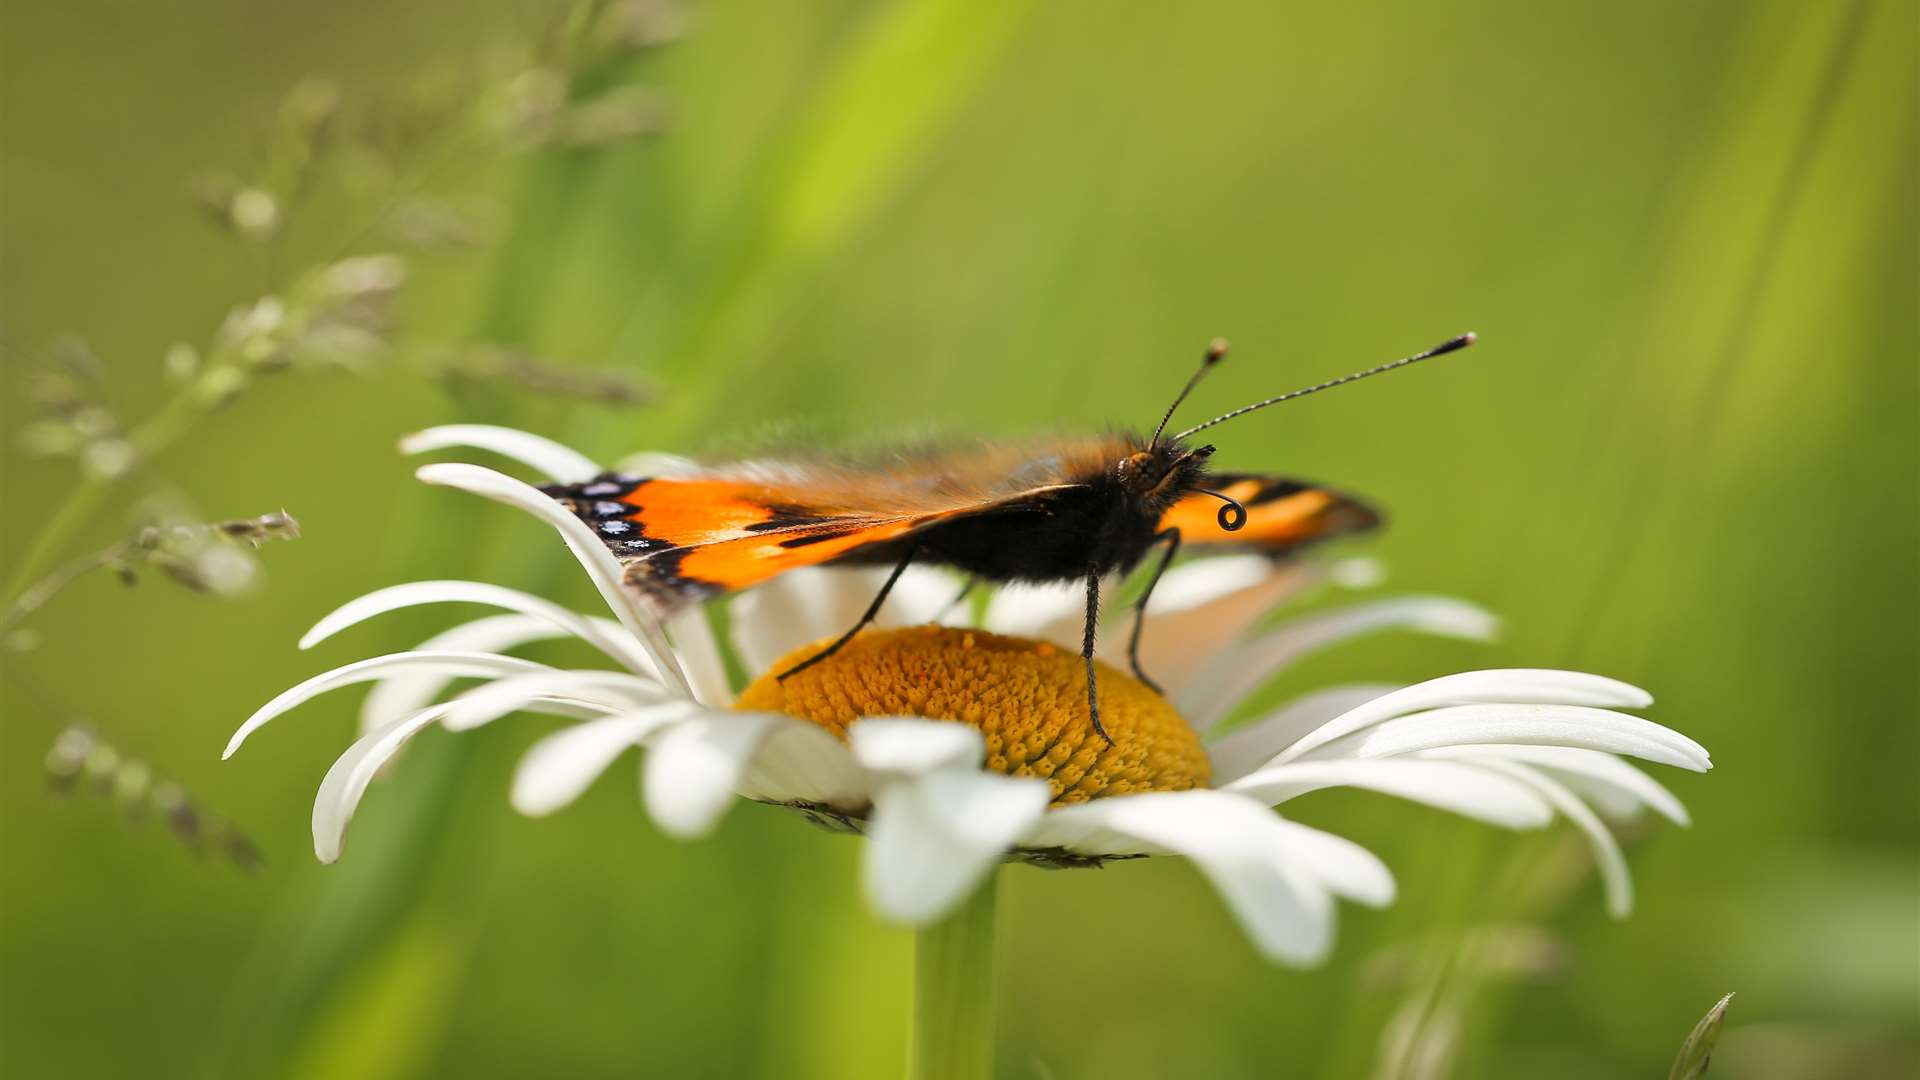 Butterflies feed mainly on nectar from flowers